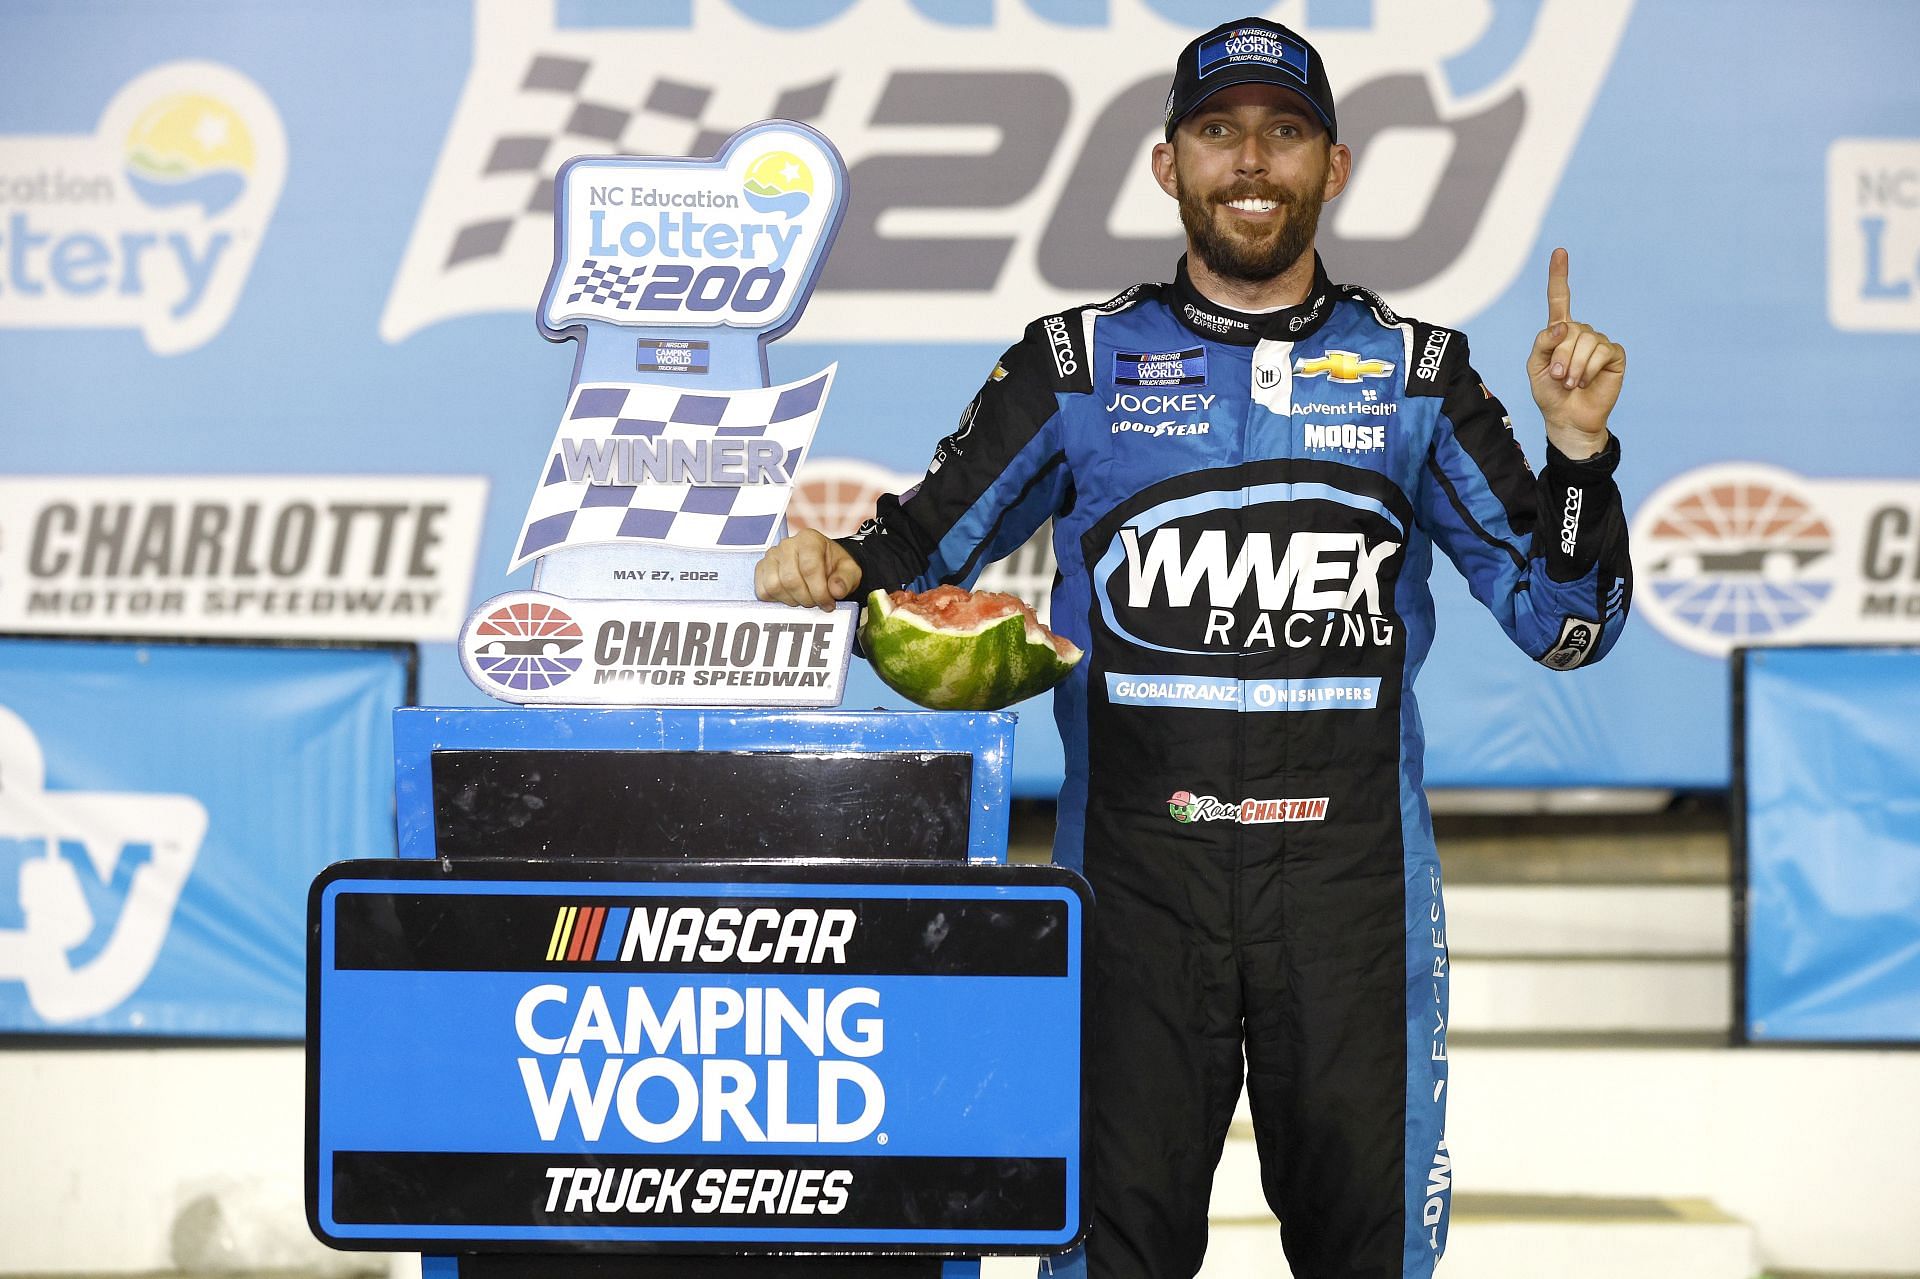 Chastain celebrates in victory lane after winning the NASCAR Camping World Truck Series North Carolina Education Lottery 200 at Charlotte Motor Speedway